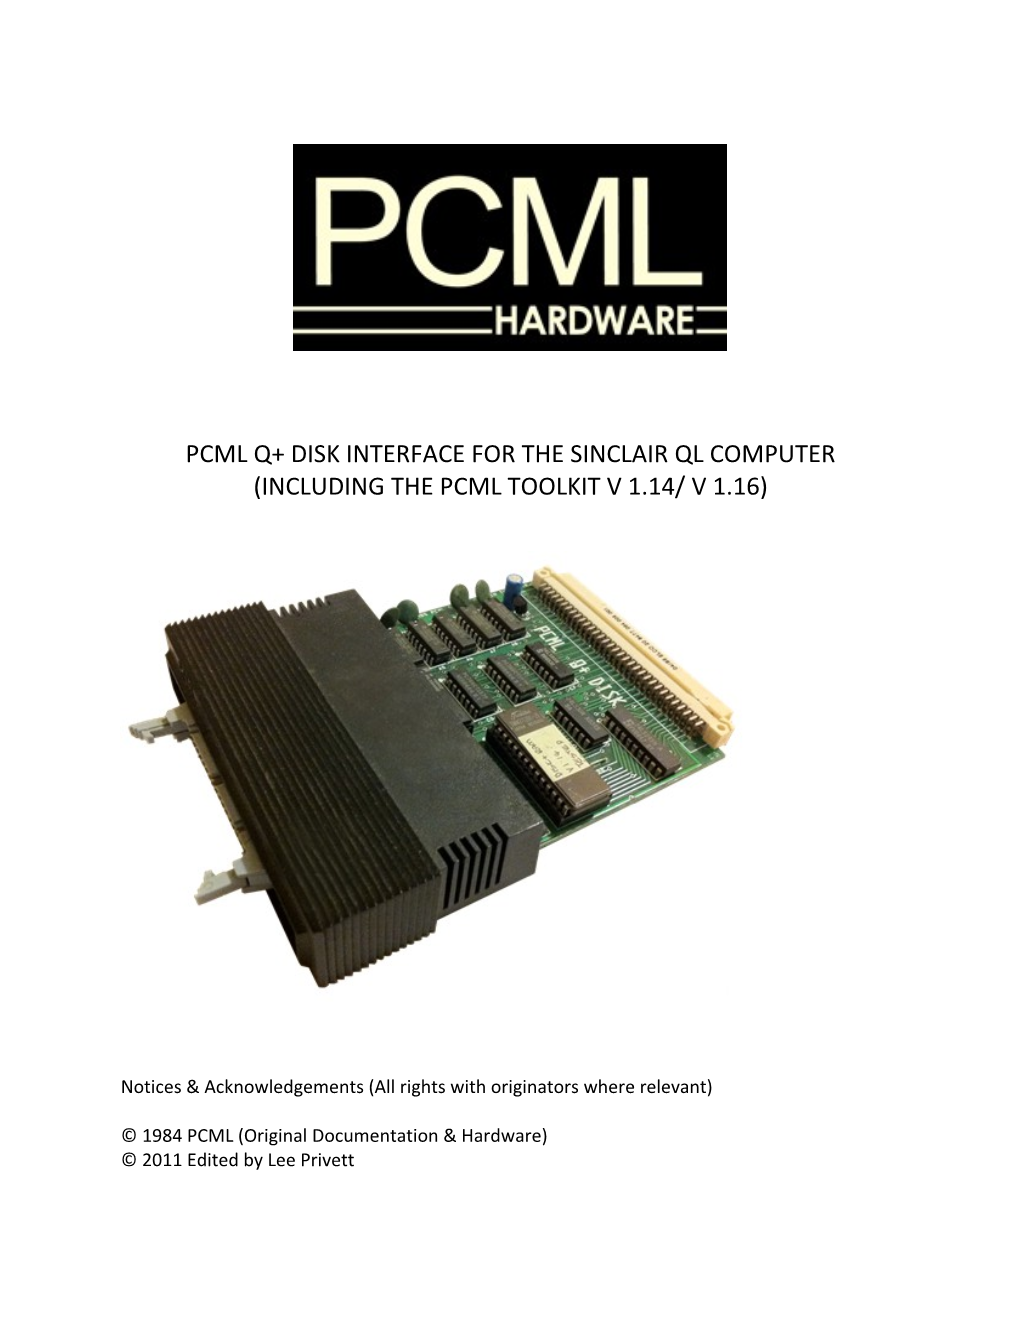 PCML Q+ Disk Interface for the Sinclair QL Computer